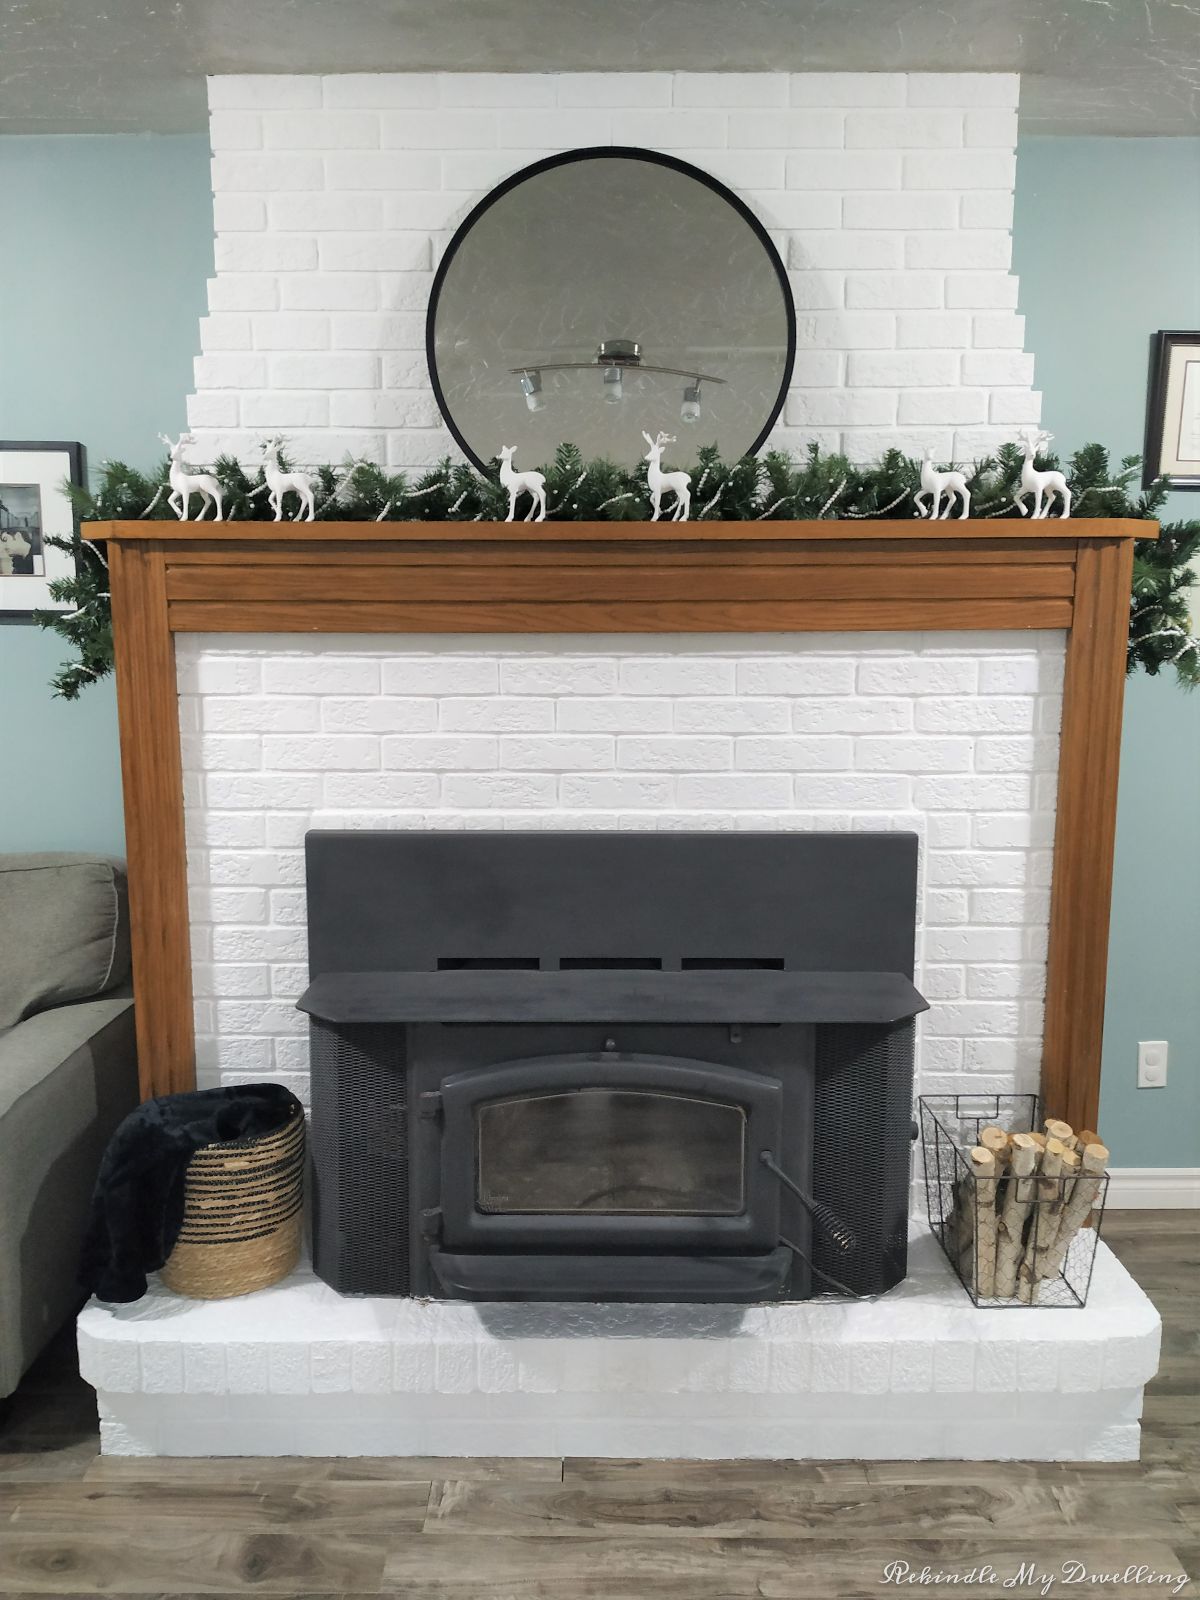 Fireplace mantel decorated for Christmas.